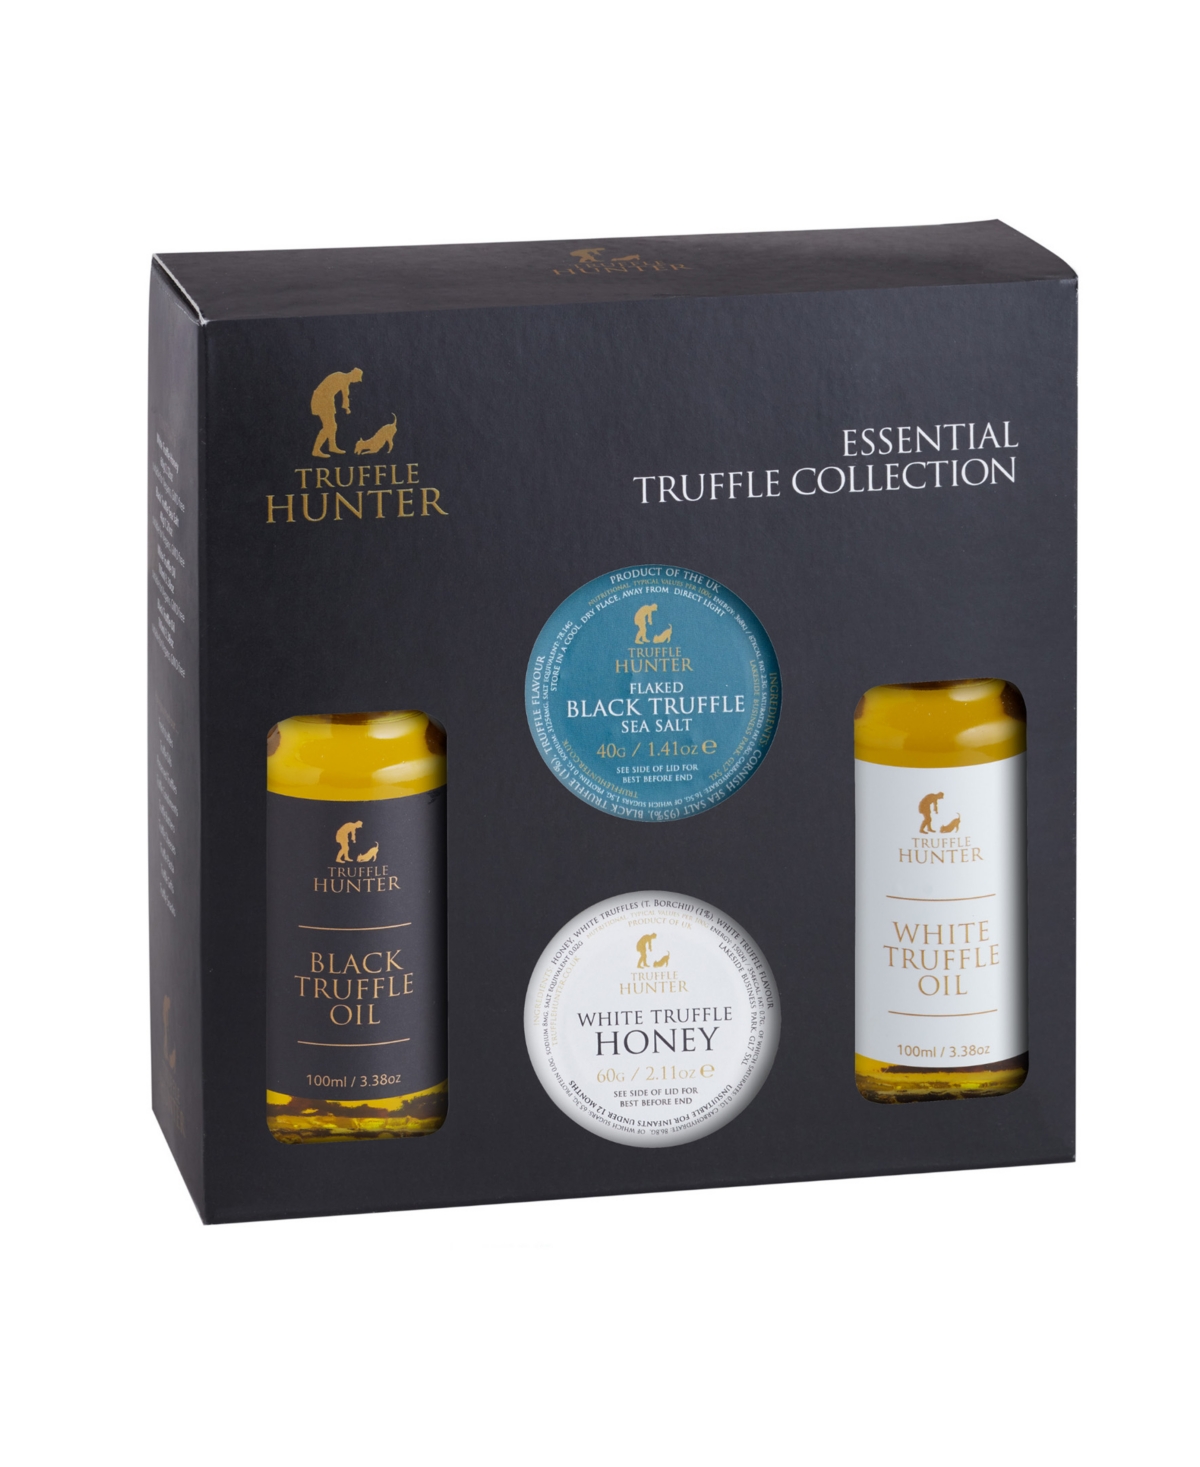 Trufflehunter Essential Truffle Gift Collection In No Color